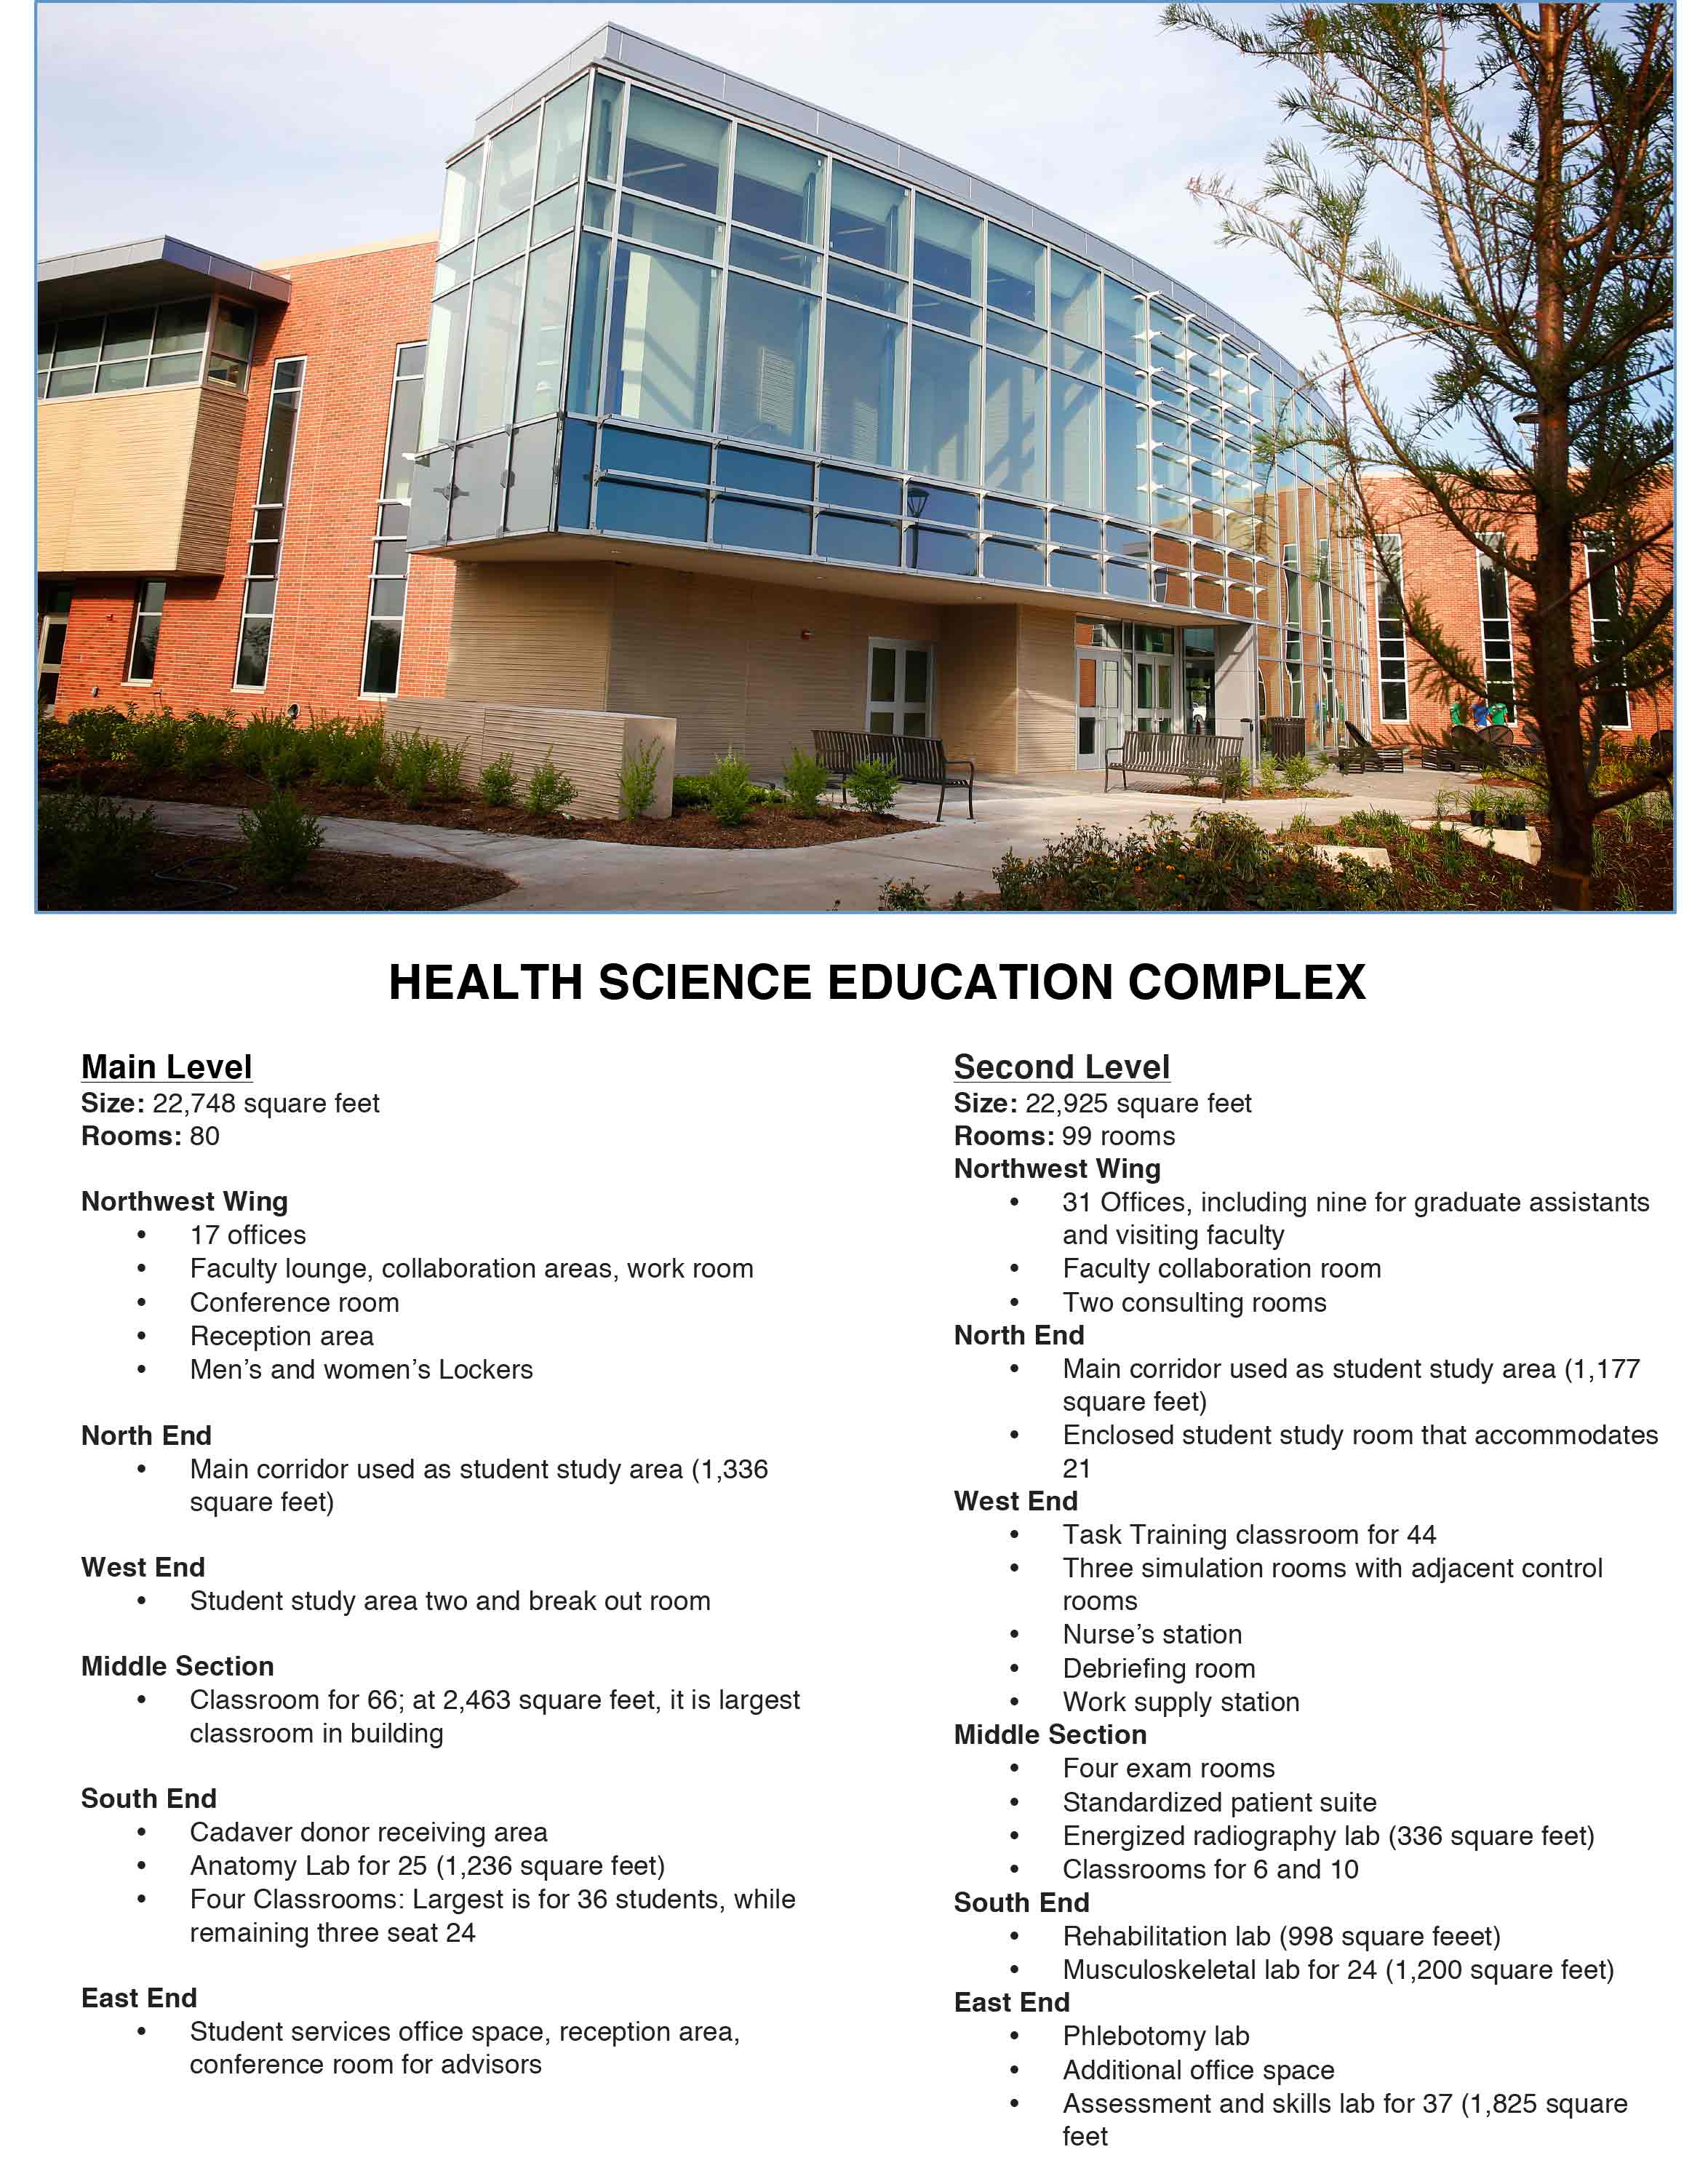 HEALTH SCIENCE EDUCATION COMPLEX (Breakdown of Space) Main Level Size: 22,748 square feet Rooms: 80 Northwest Wing •	17 offices •	Faculty lounge, collaboration areas, work room •	Conference room •	Reception area •	Men’s and women’s Lockers North End •	Main corridor used as student study area (1,336 square feet) West End •	Student study area two and break out room  Middle Section •	Classroom for 66; at 2,463 square feet, it is largest classroom in building South End •	Cadaver donor receiving area •	Anatomy Lab for 25 (1,236 square feet) •	Four Classrooms: Largest is for 36 students, while remaining three seat 24 East End •	Student services office space, reception area, conference room for advisors   Second Level Size: 22,925 square feet Rooms: 99 rooms Northwest Wing •	31 Offices, including nine for graduate assistants and visiting faculty •	Faculty collaboration room •	Two consulting rooms North End •	Main corridor used as student study area (1,177 square feet) •	Enclosed student study room that accommodates 21 West End •	Task Training classroom for 44 •	Three simulation rooms with adjacent control rooms •	Nurse’s station •	Debriefing room •	Work supply station Middle Section •	Four exam rooms •	Standardized patient suite •	Energized radiography lab (336 square feet) •	Classroom for 6 •	Classroom for 10 South End •	Rehabilitation lab (998 square feeet) •	Musculoskeletal lab for 24 (1,200 square feet) East End •	Phlebotomy lab •	Additional office space •	Assessment and skills lab for 37 (1,825 square feet)